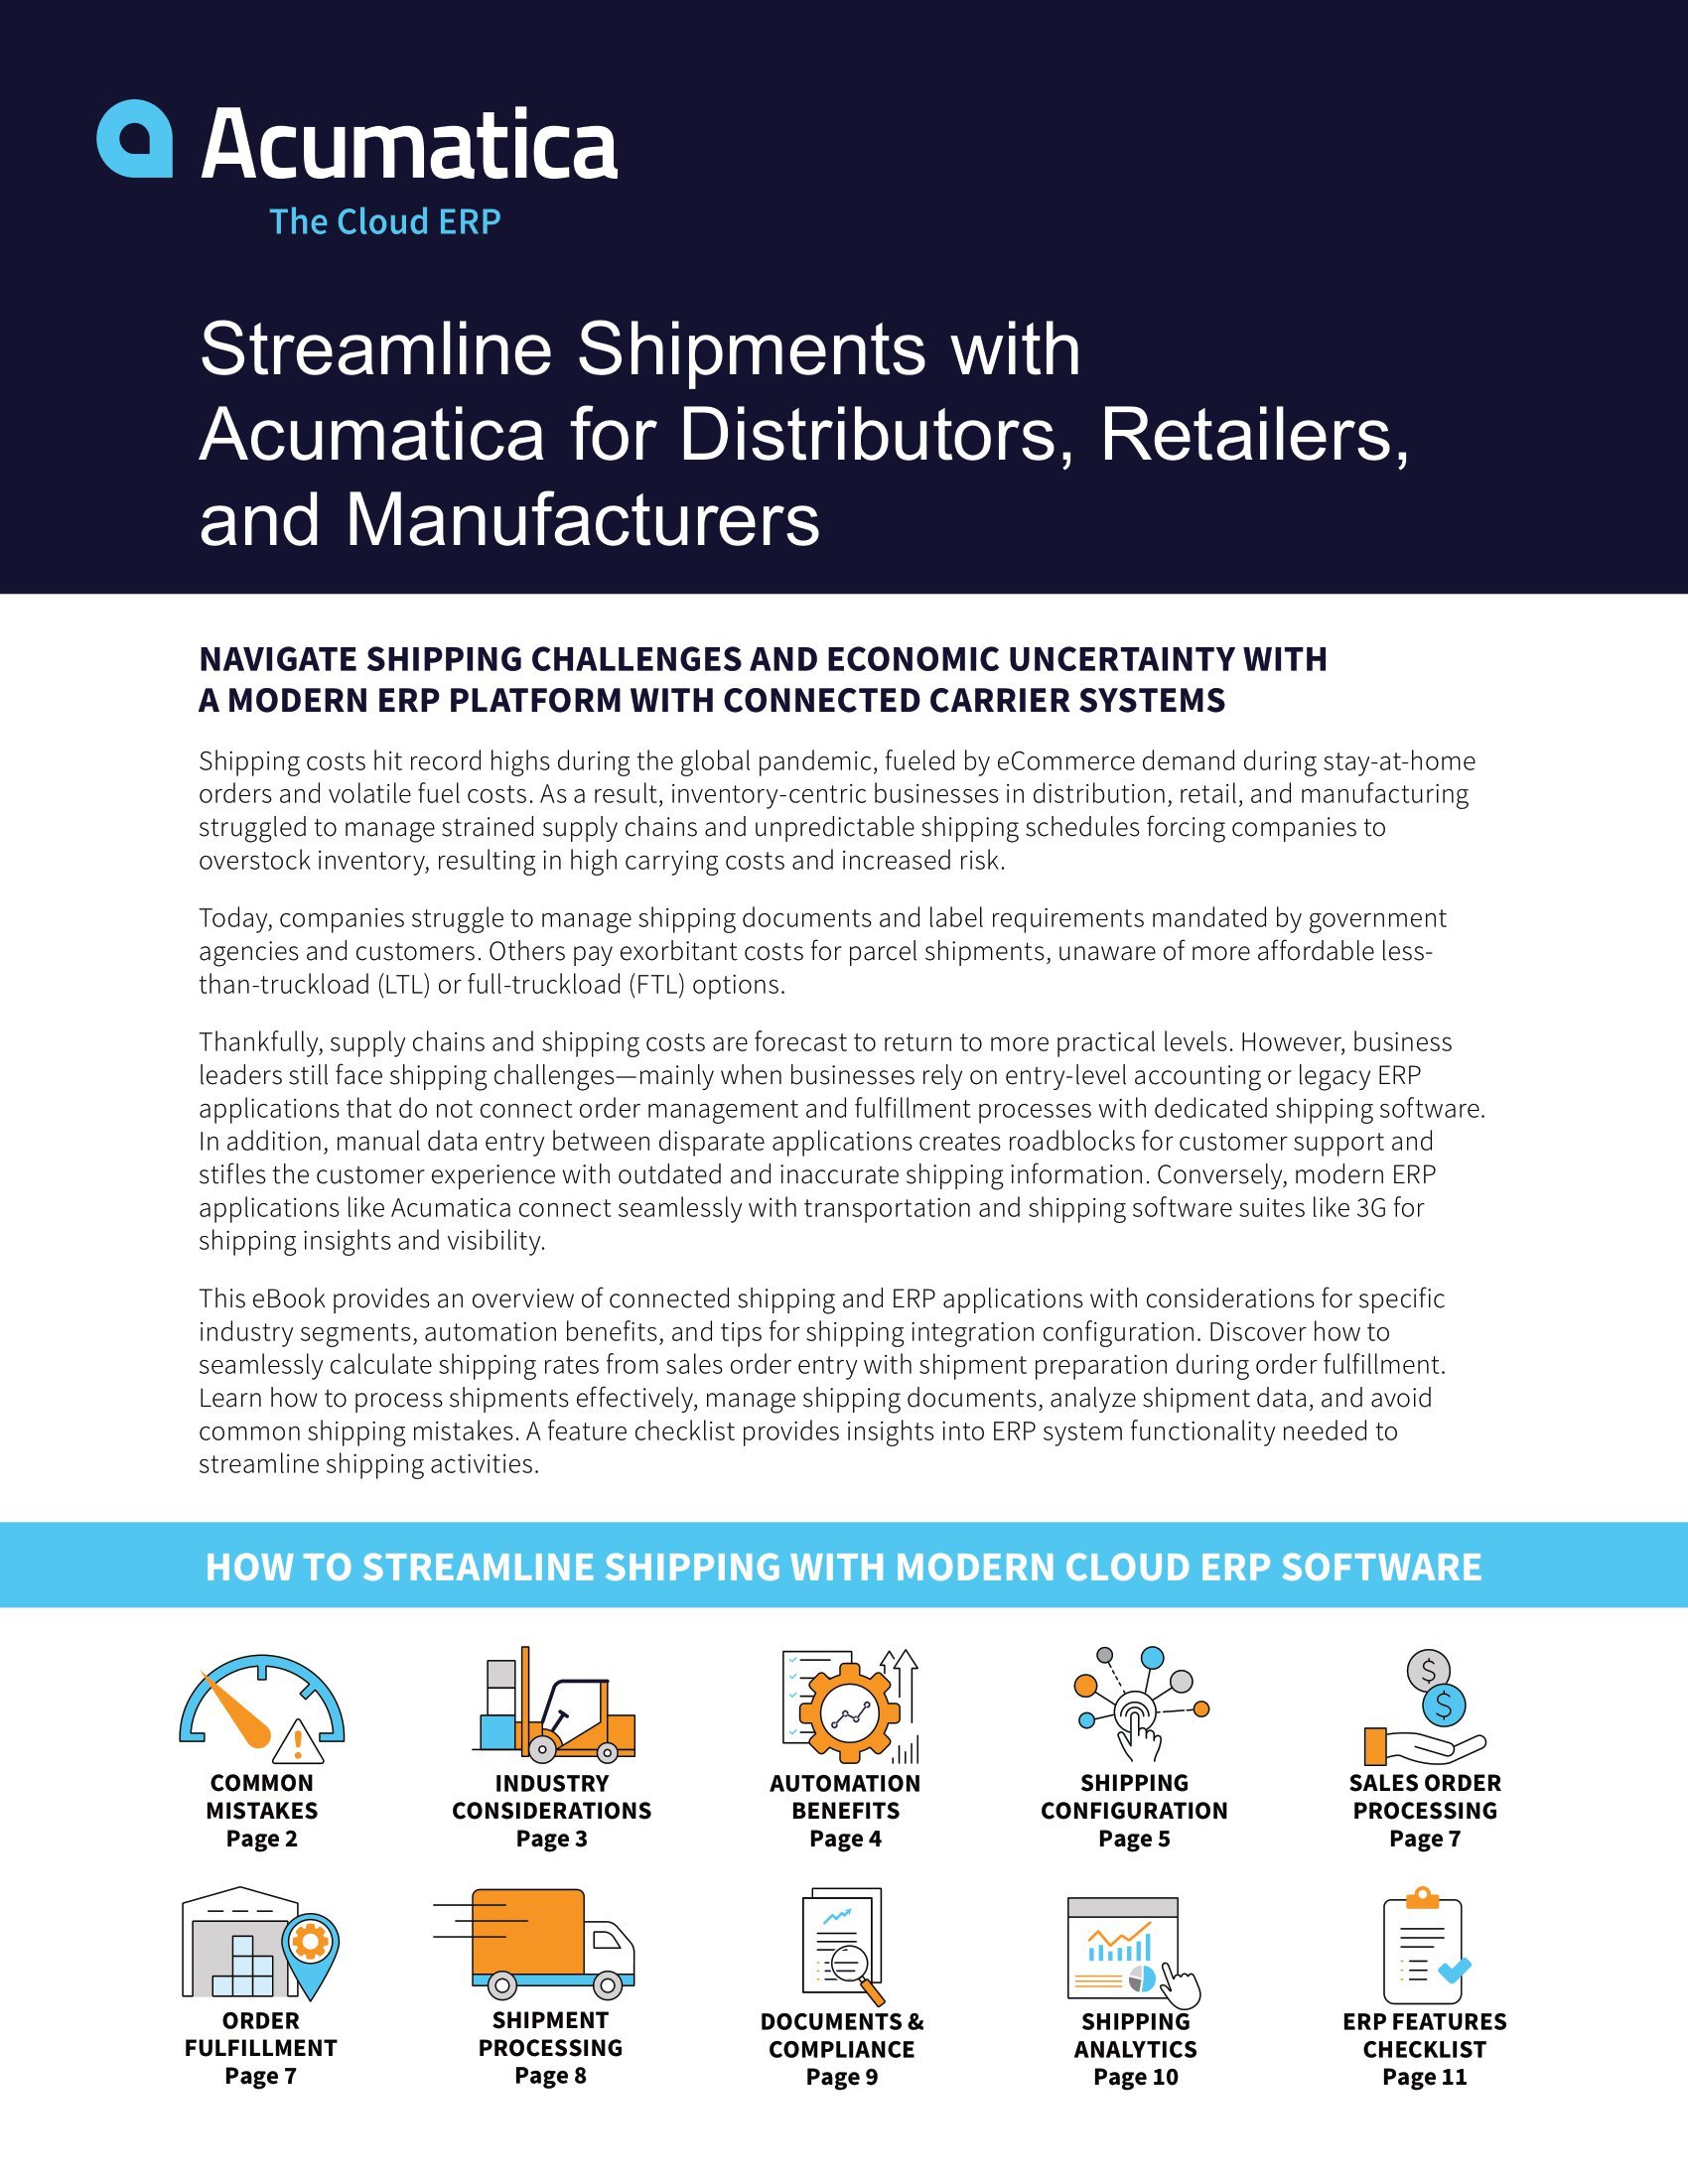 Why Modern Cloud ERP Applications and Connected Shipping is a Must for Today’s Distributors, Retailers, and Manufacturers